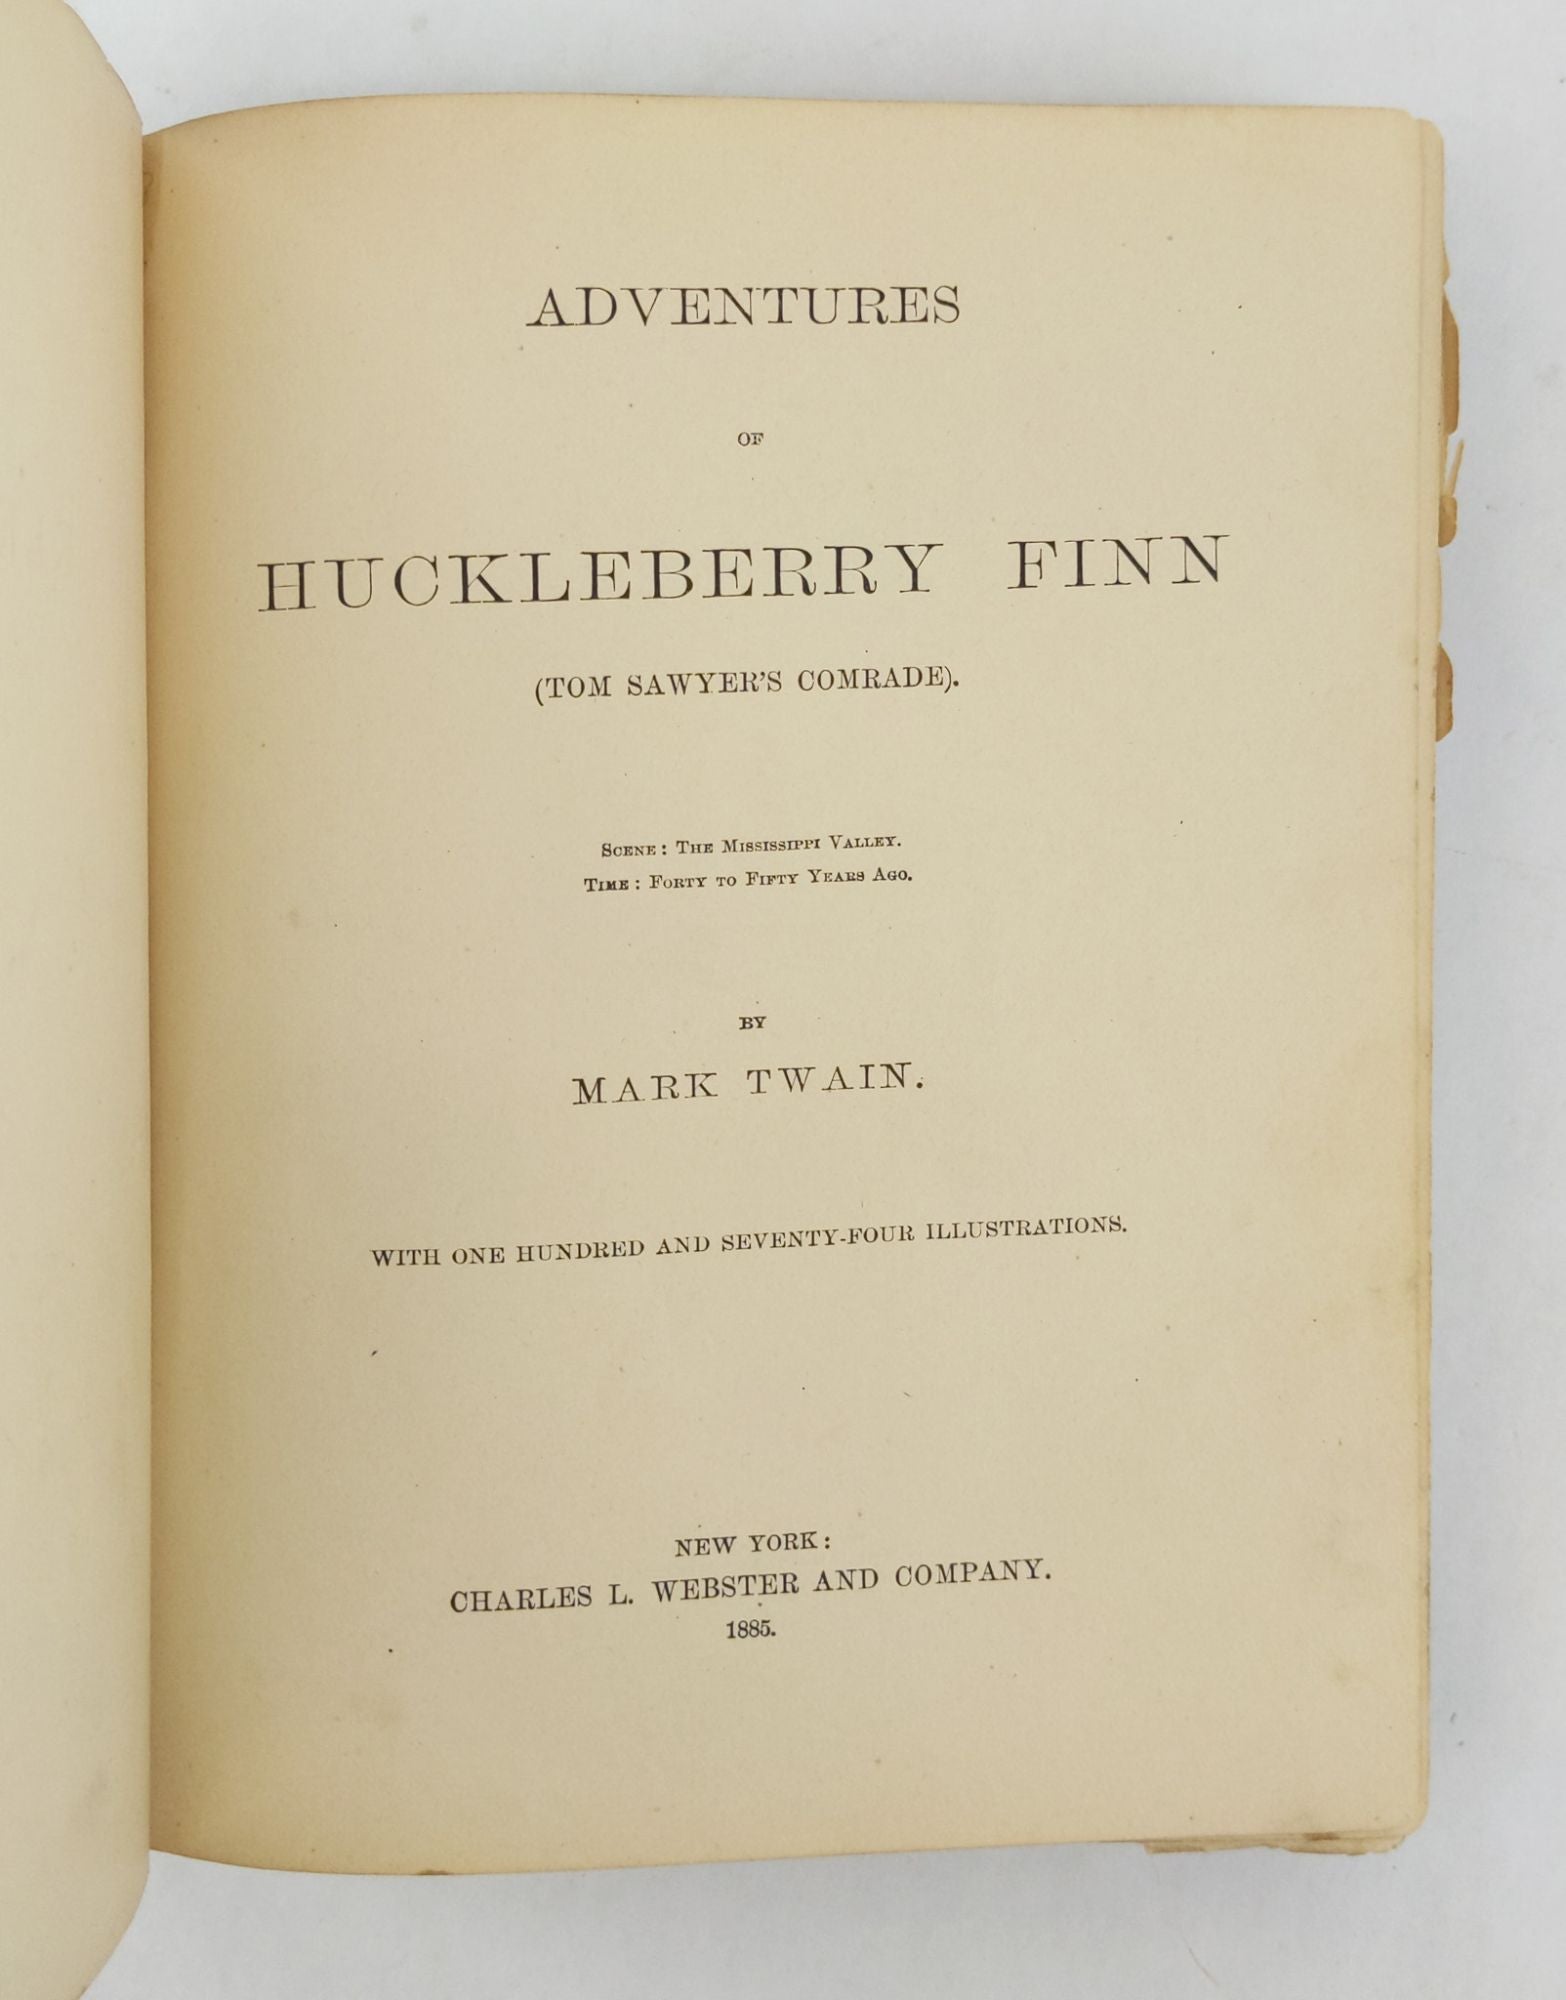 Product Image for ADVENTURES OF HUCKLEBERRY FINN (TOM SAWYER'S COMRADE)